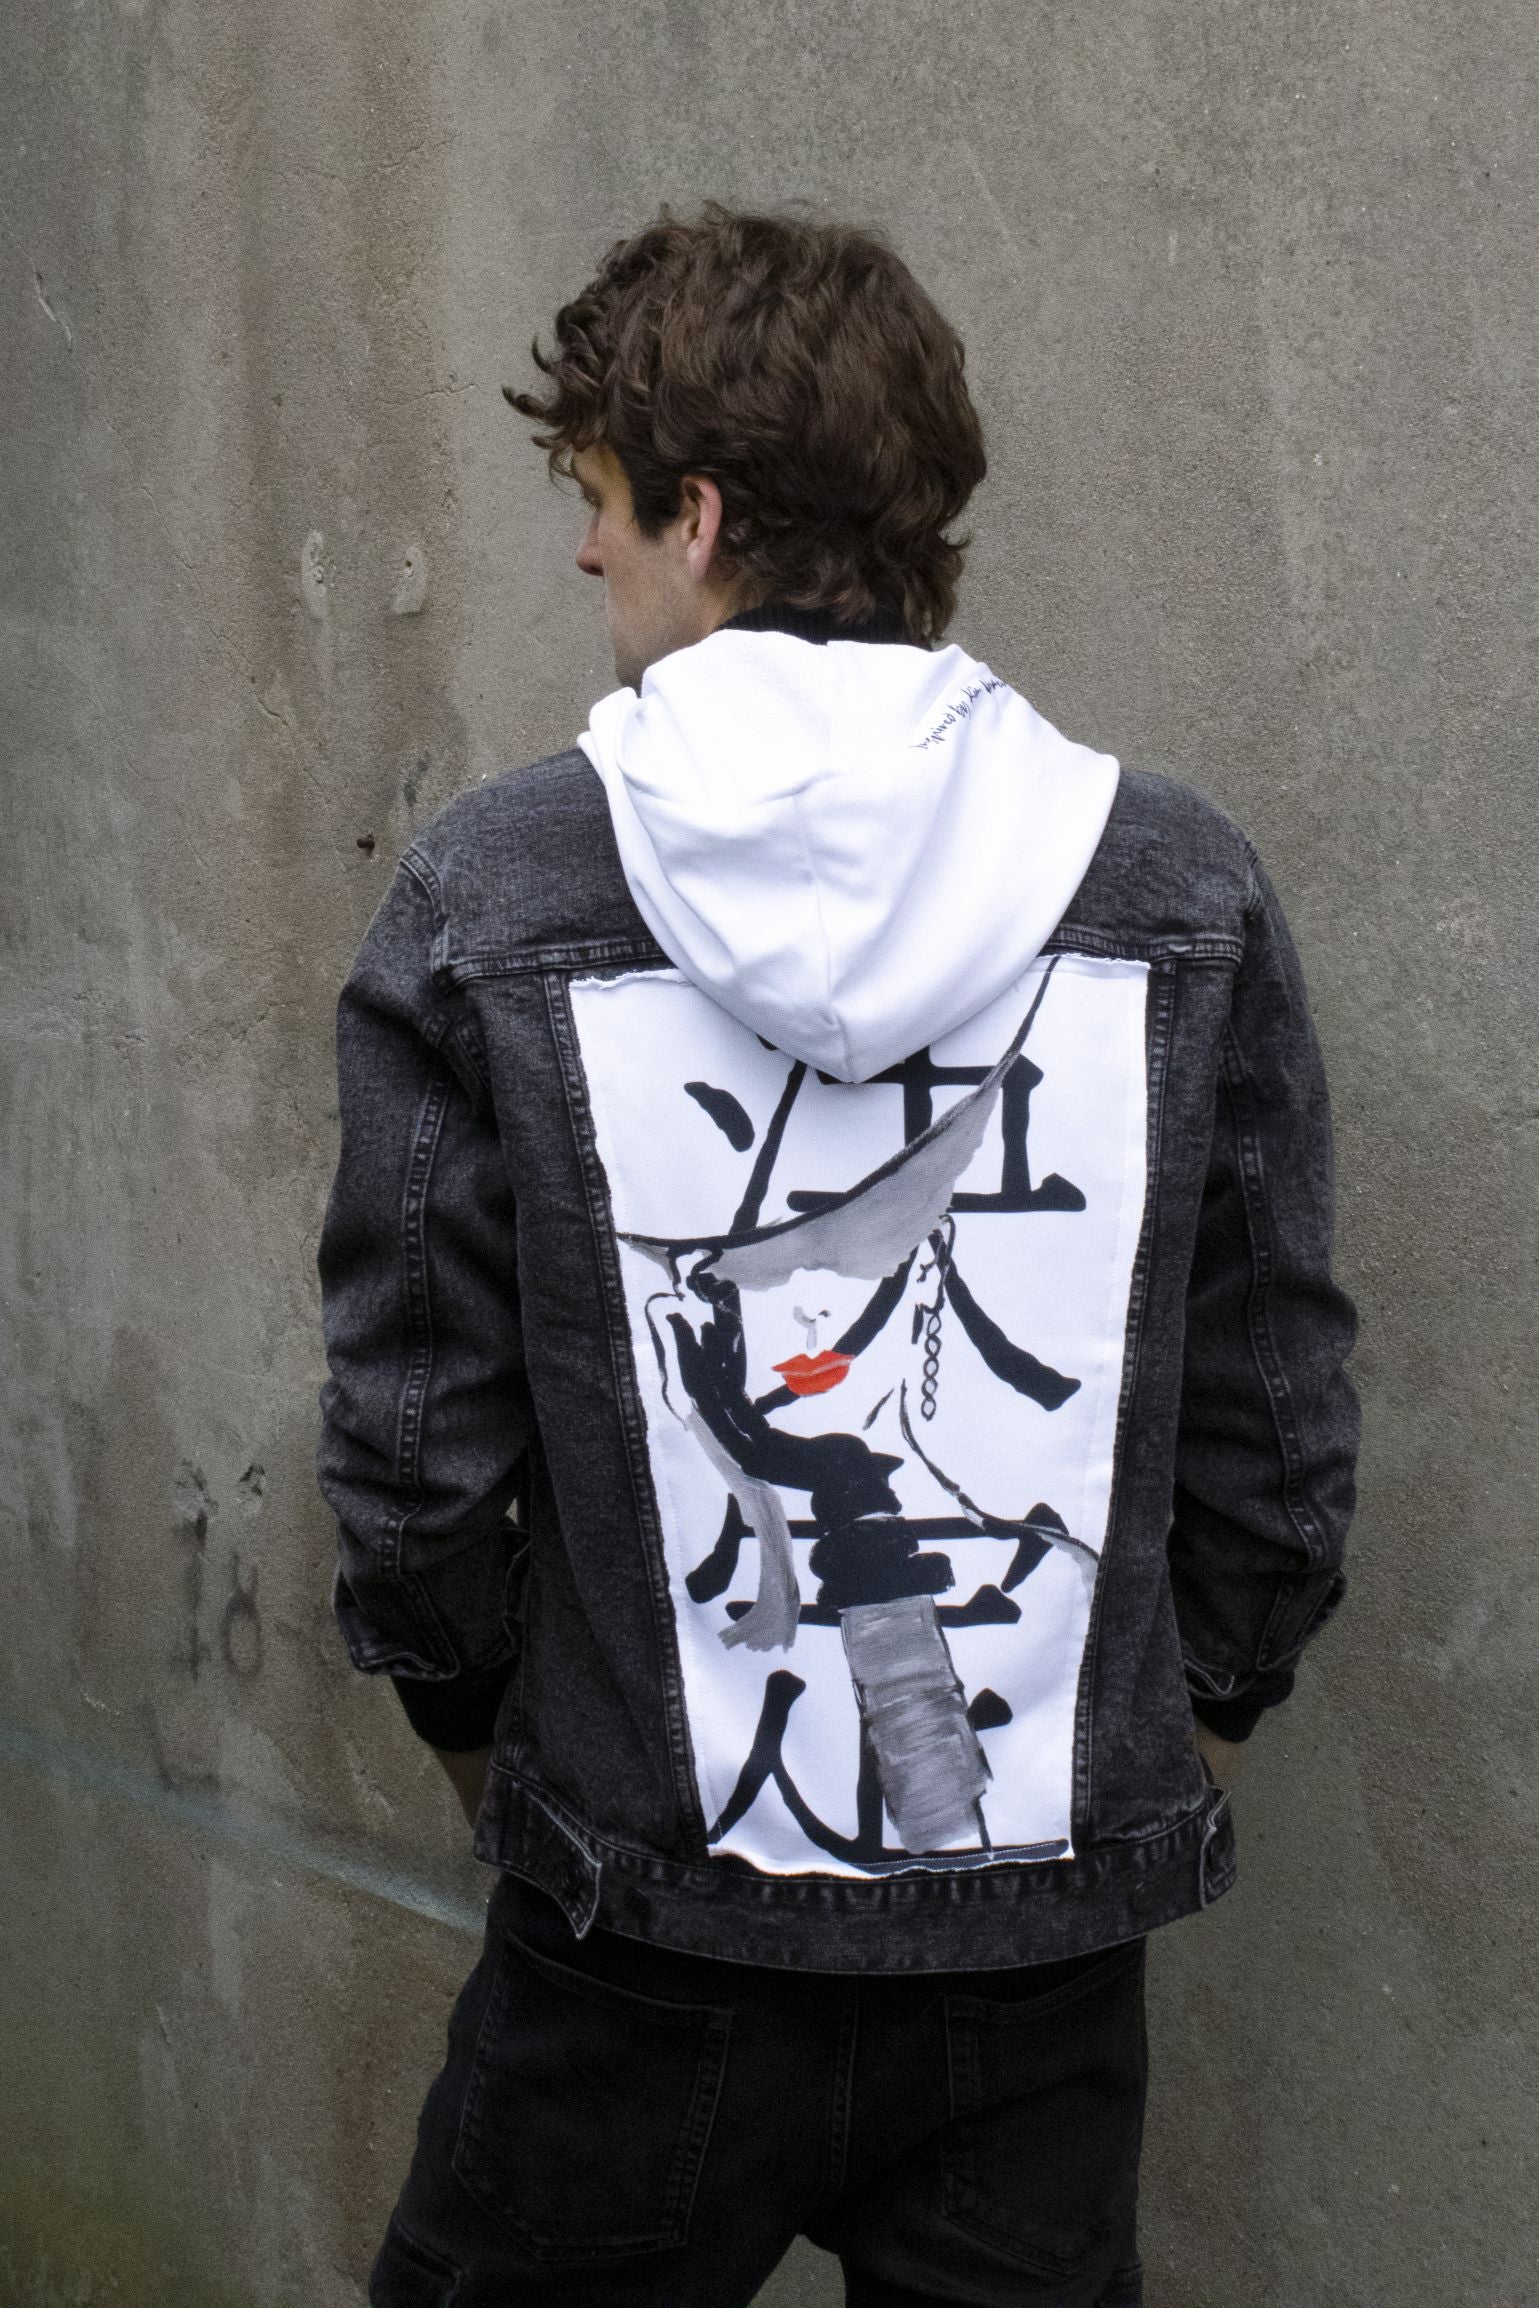 backside of the grace jacket. Black denim fabric with white panels and hood